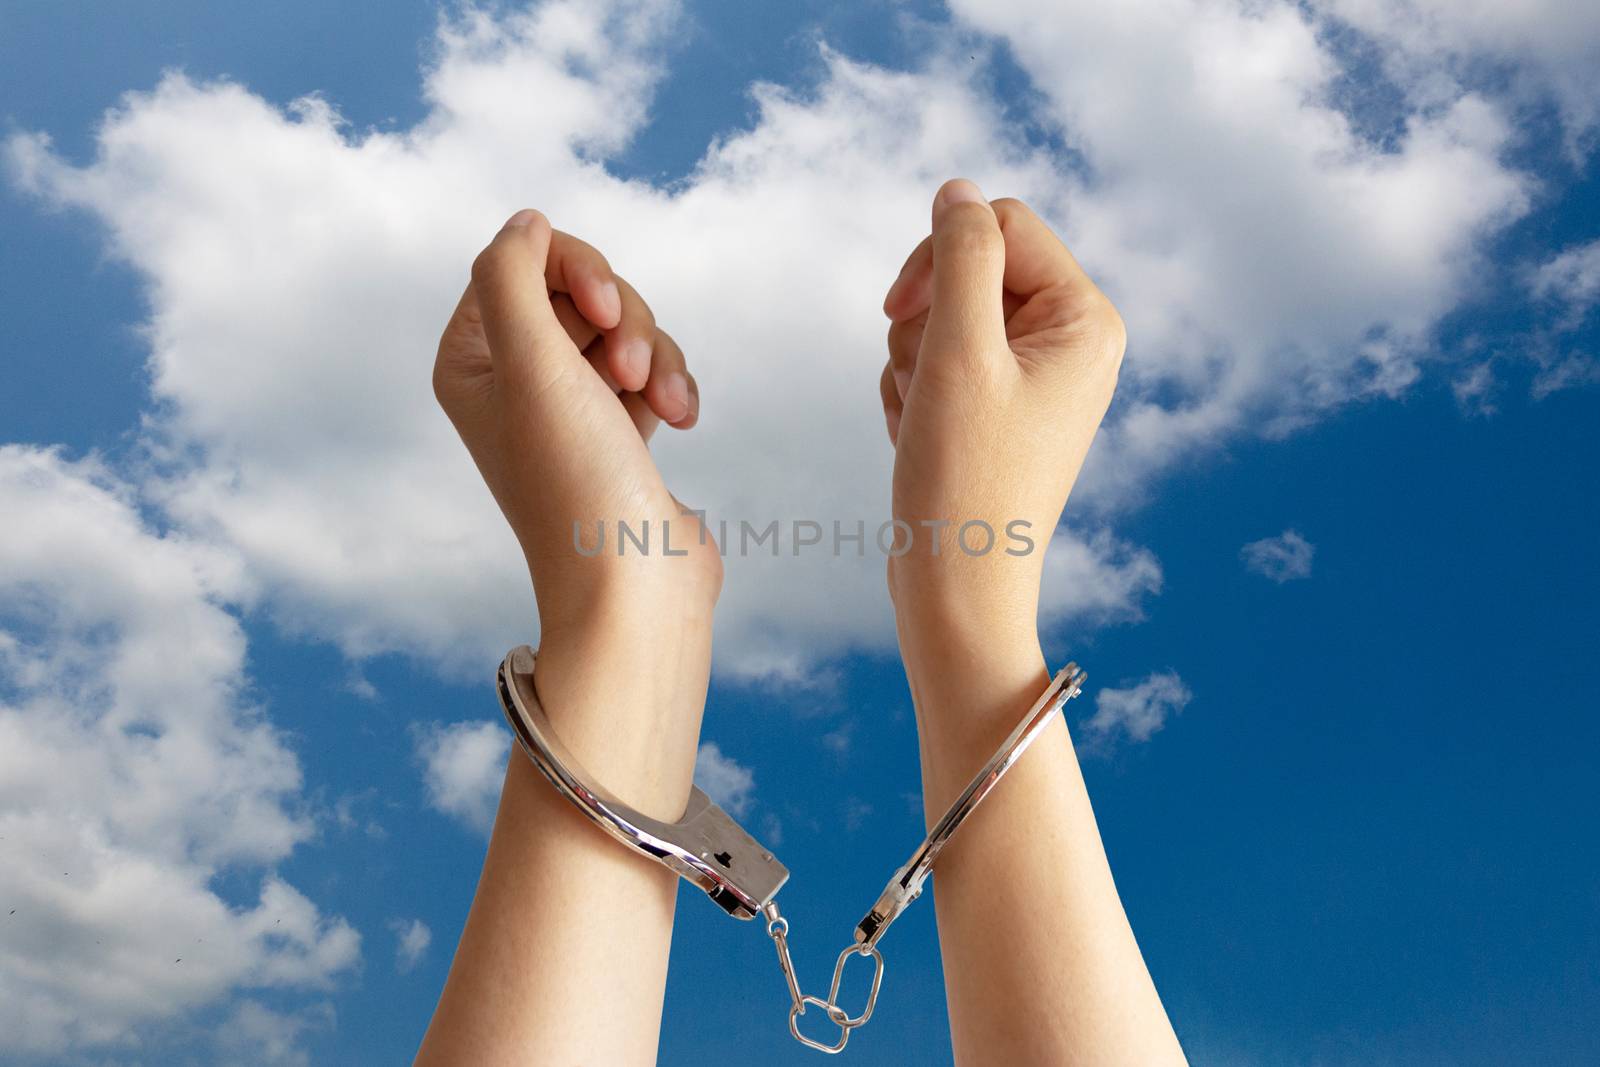 human trafficking ,slave labor and labor oppression problems concept. two hands was incarcerated by handcuff with blue sky at background